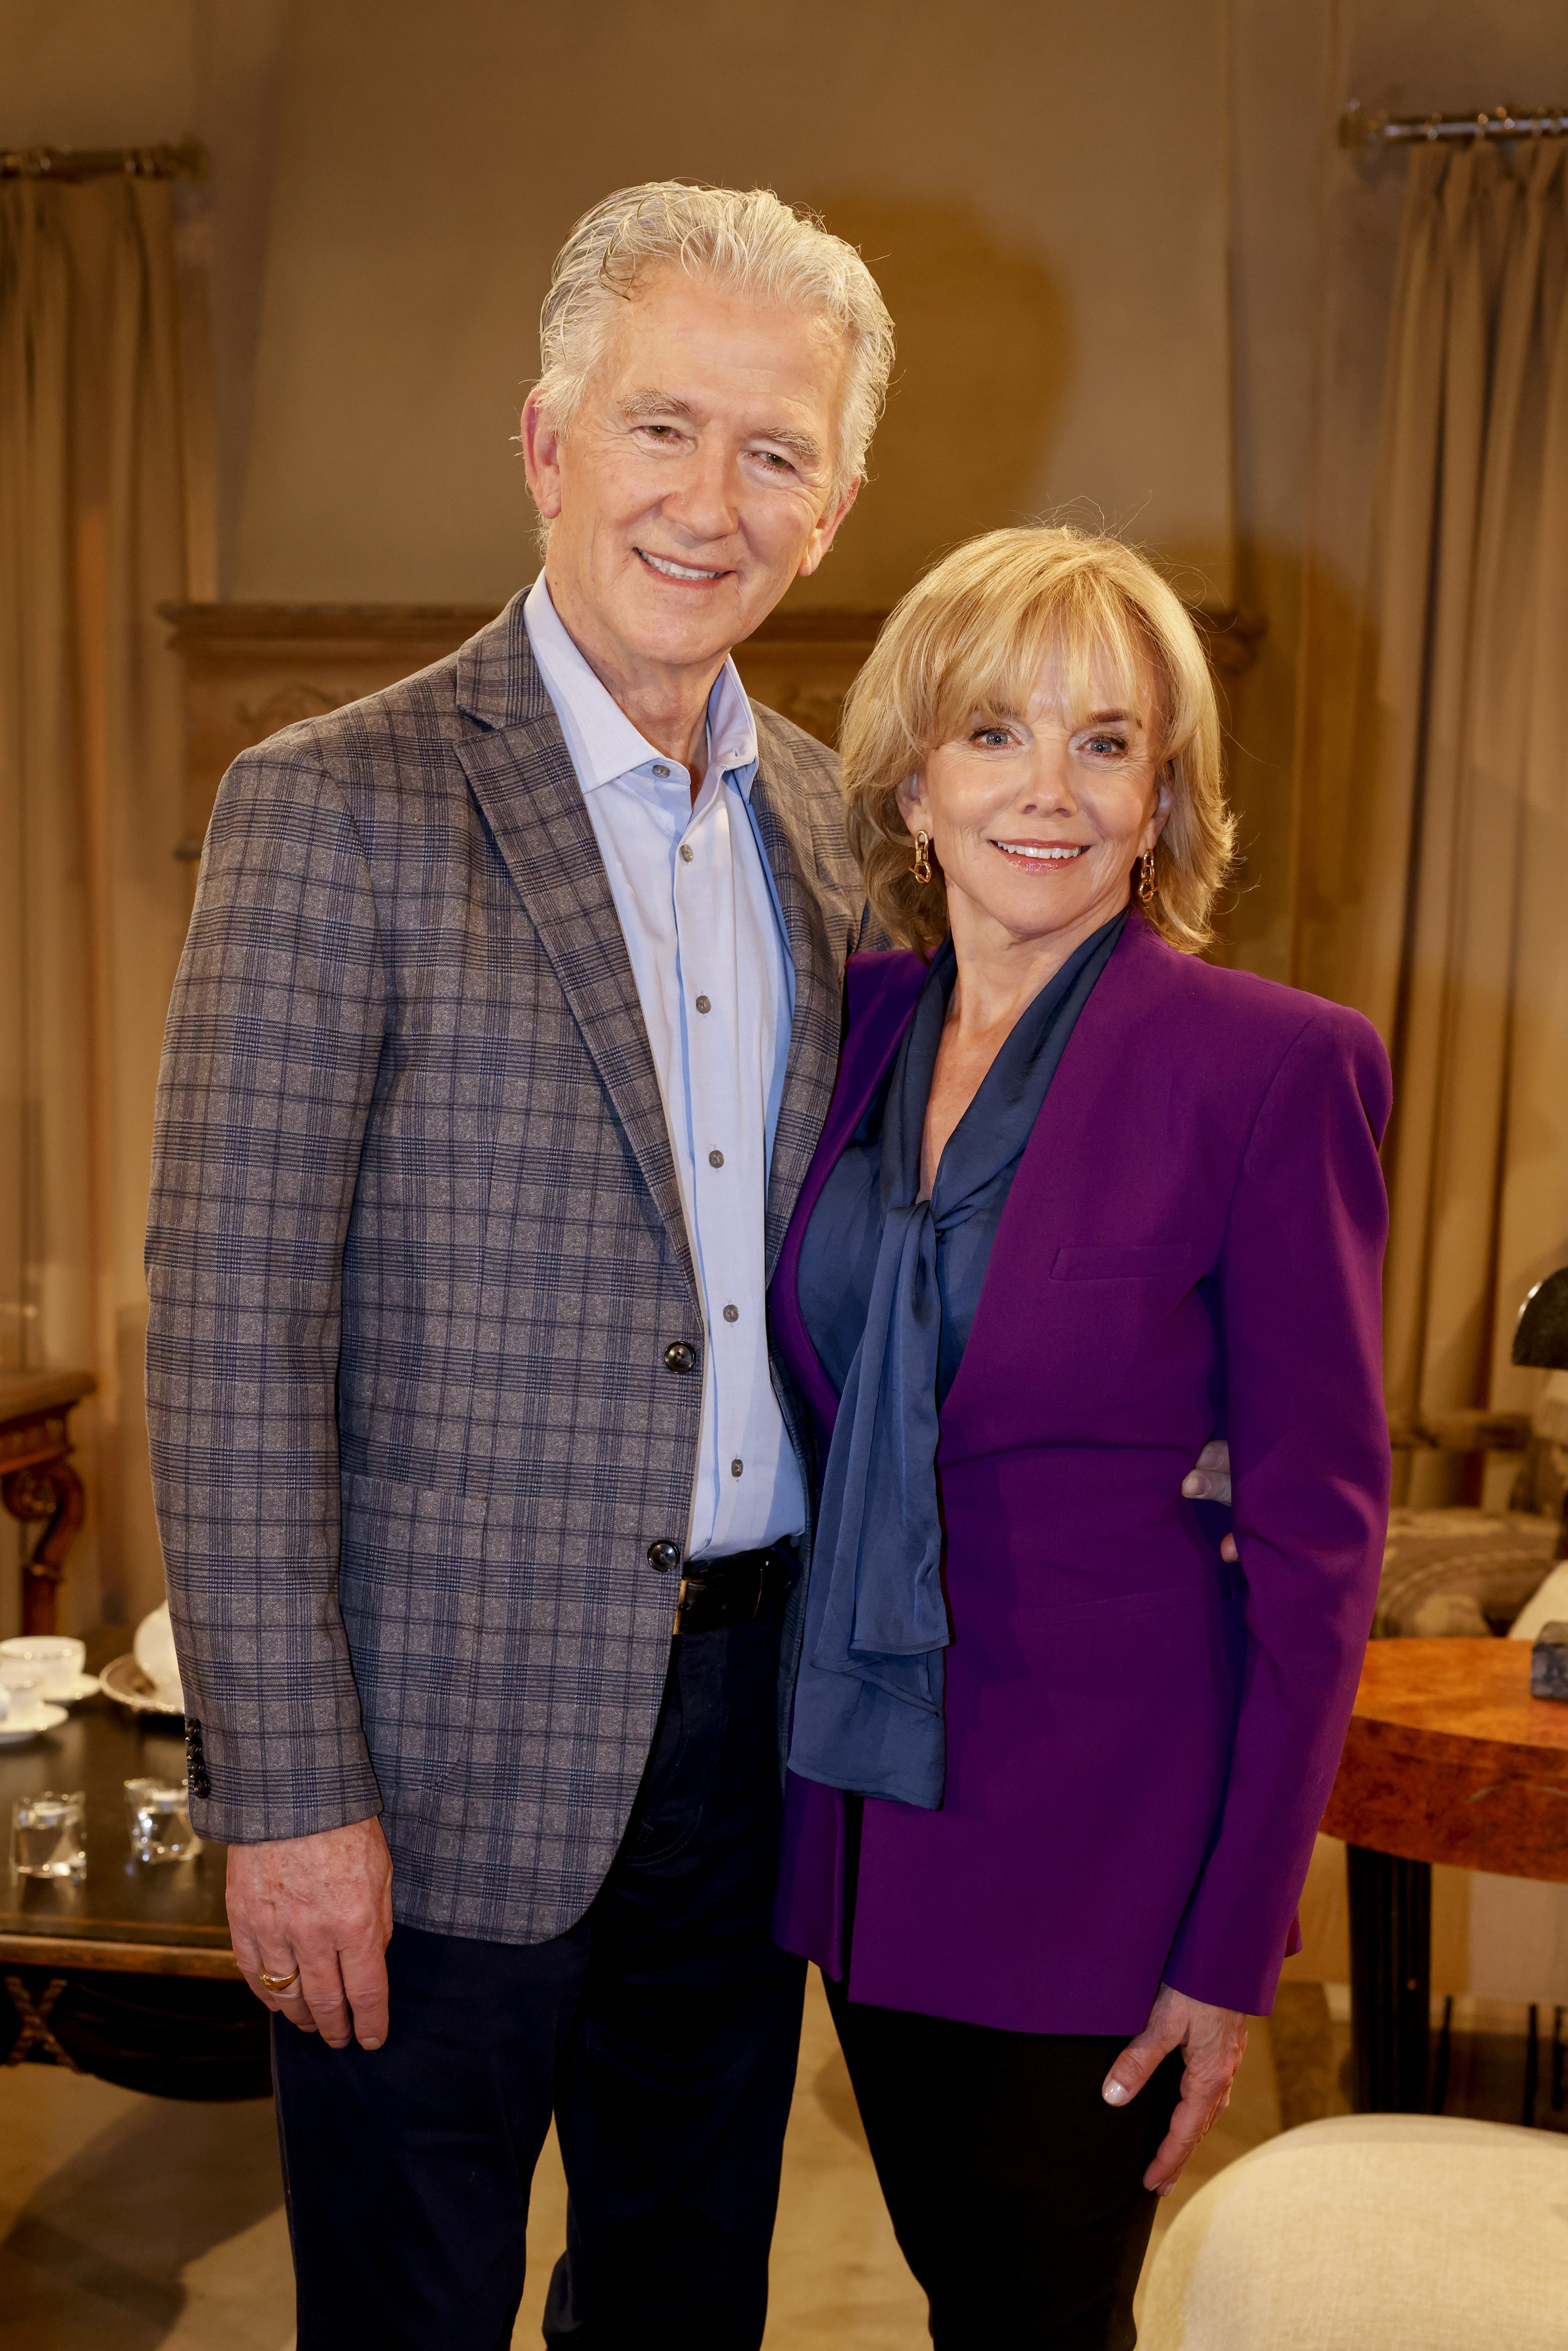 Patrick Duffy and Linda Purl on the set of "The Bold and the Beautiful" on October 24, 2022 in Los Angeles, California